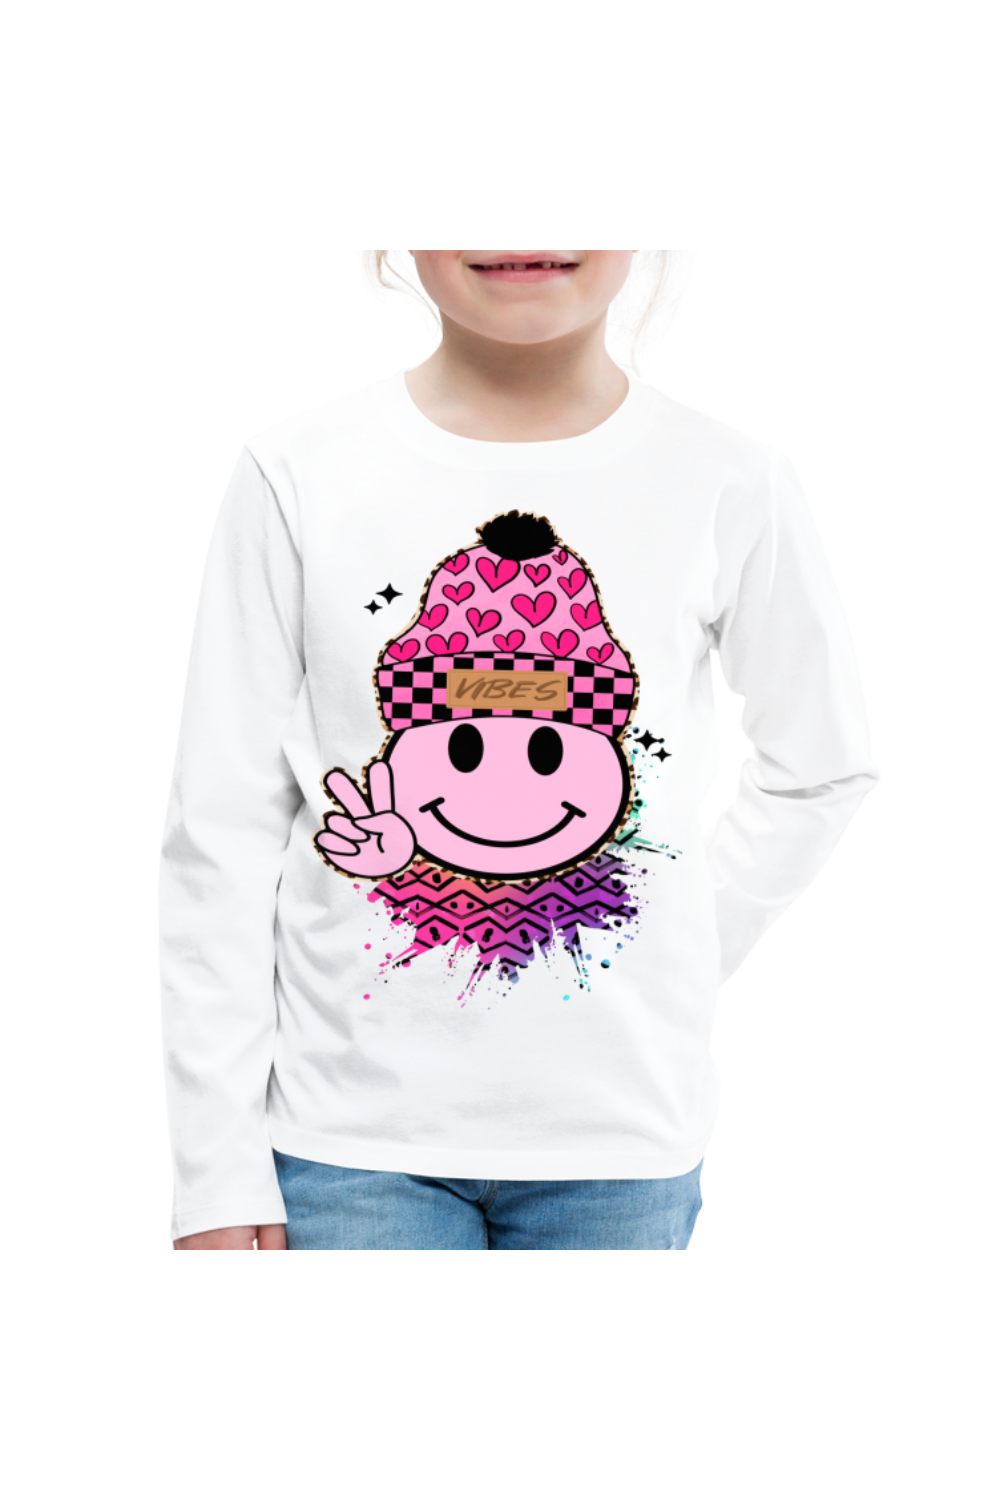 Girls Love Vibes Smiley Face Long Sleeve T-Shirt - white - NicholesGifts.online